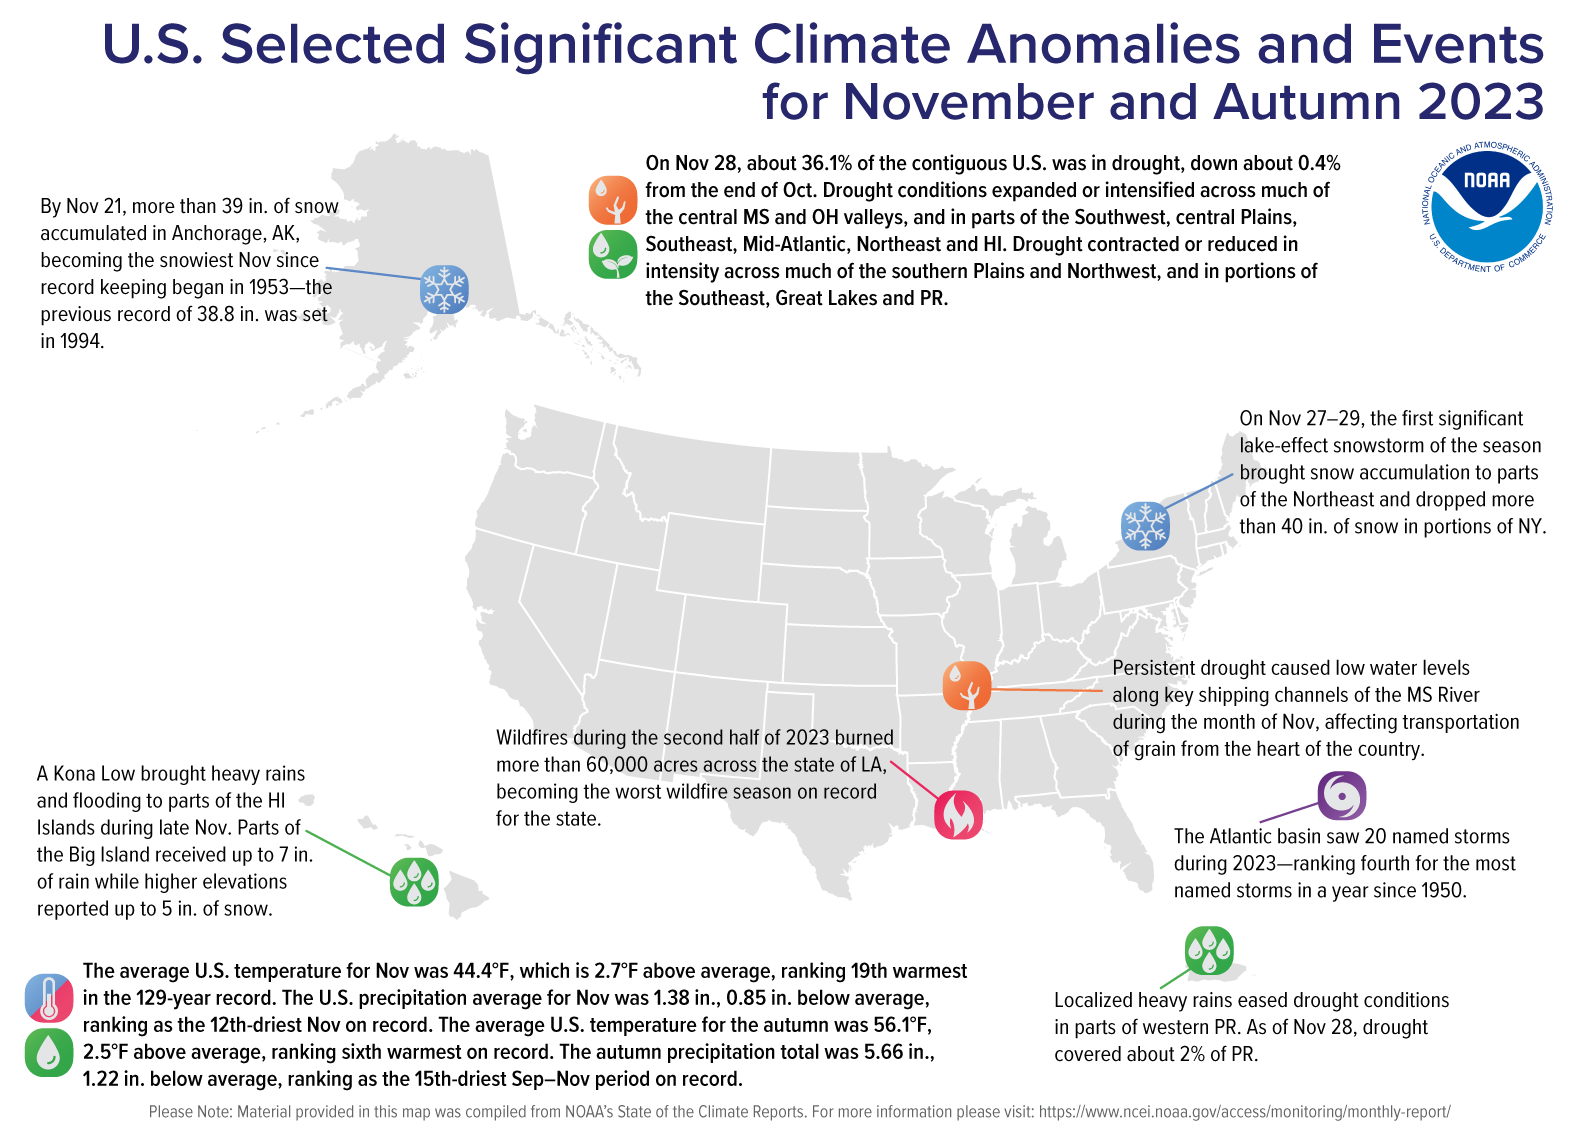 U.S. map showing locations of significant climate anomalies and events in November 2023 with text describing each event.